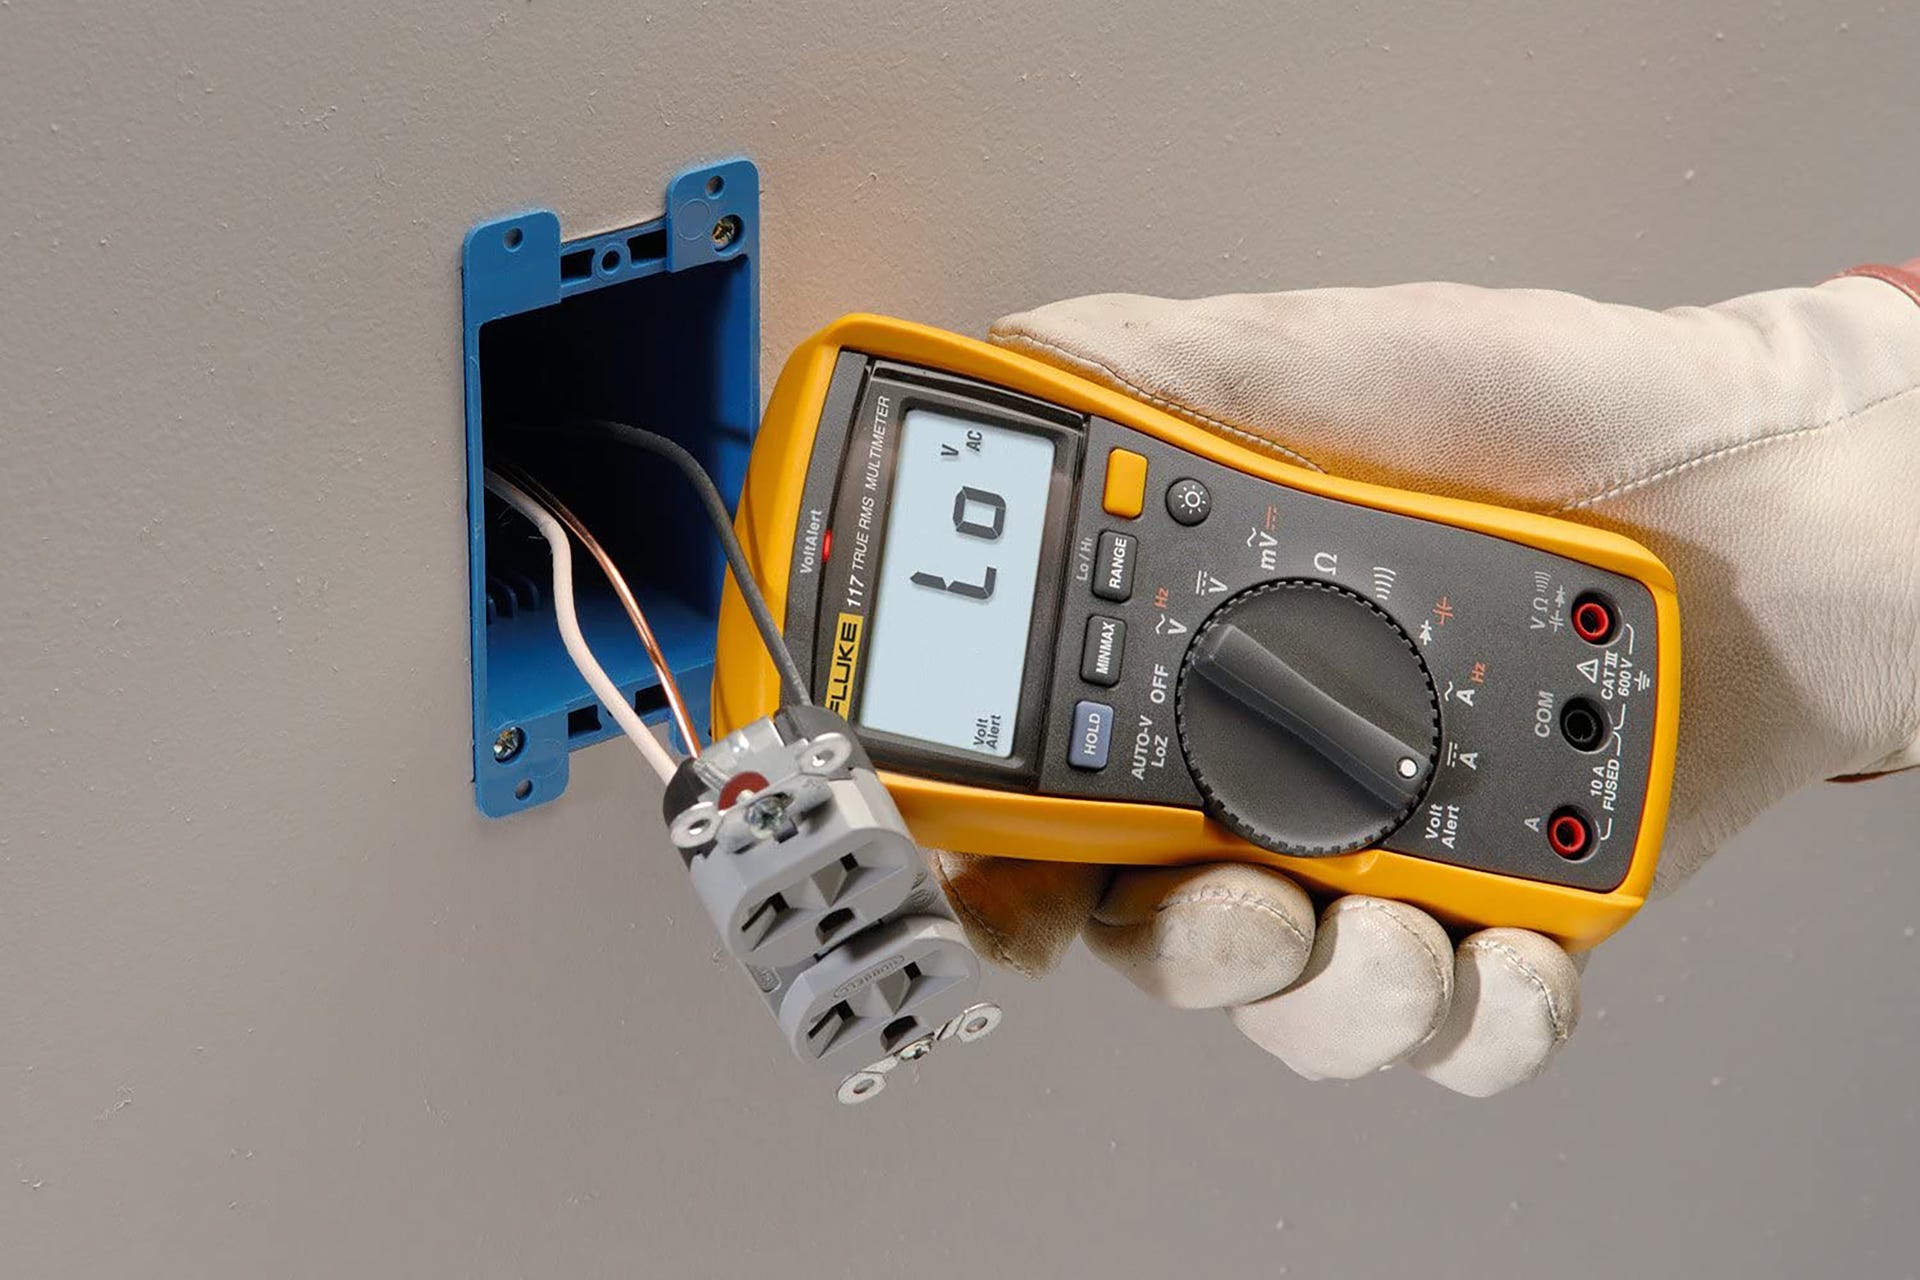 The Fluke 117 multimeter being used to take a reading